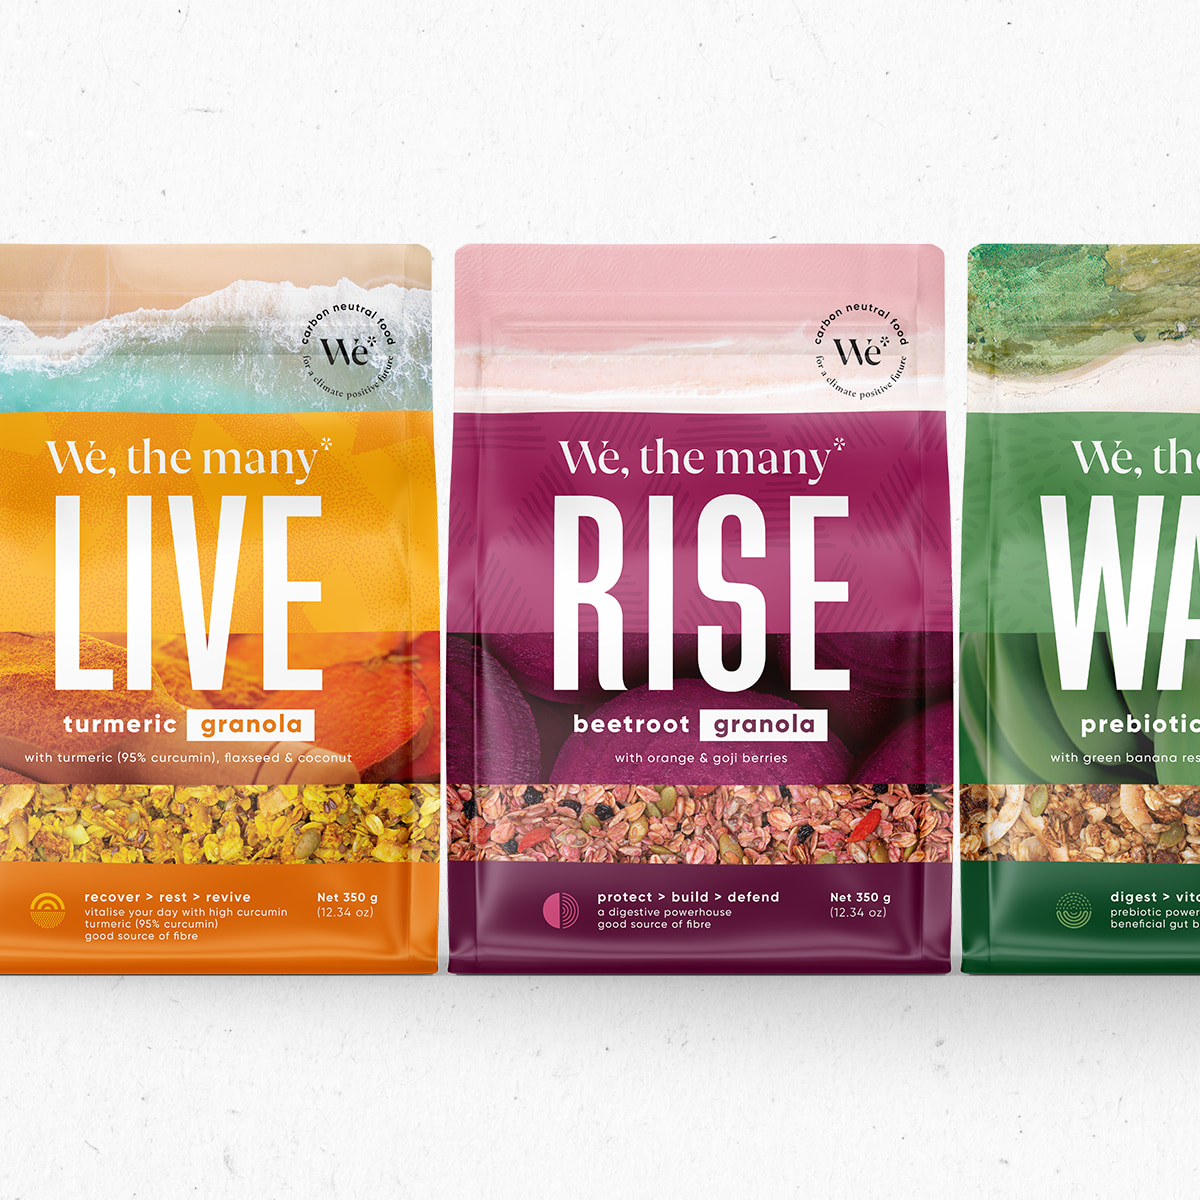 we-the-many-boxer-and-co-branding-design-agency-live-rise-wake-granola